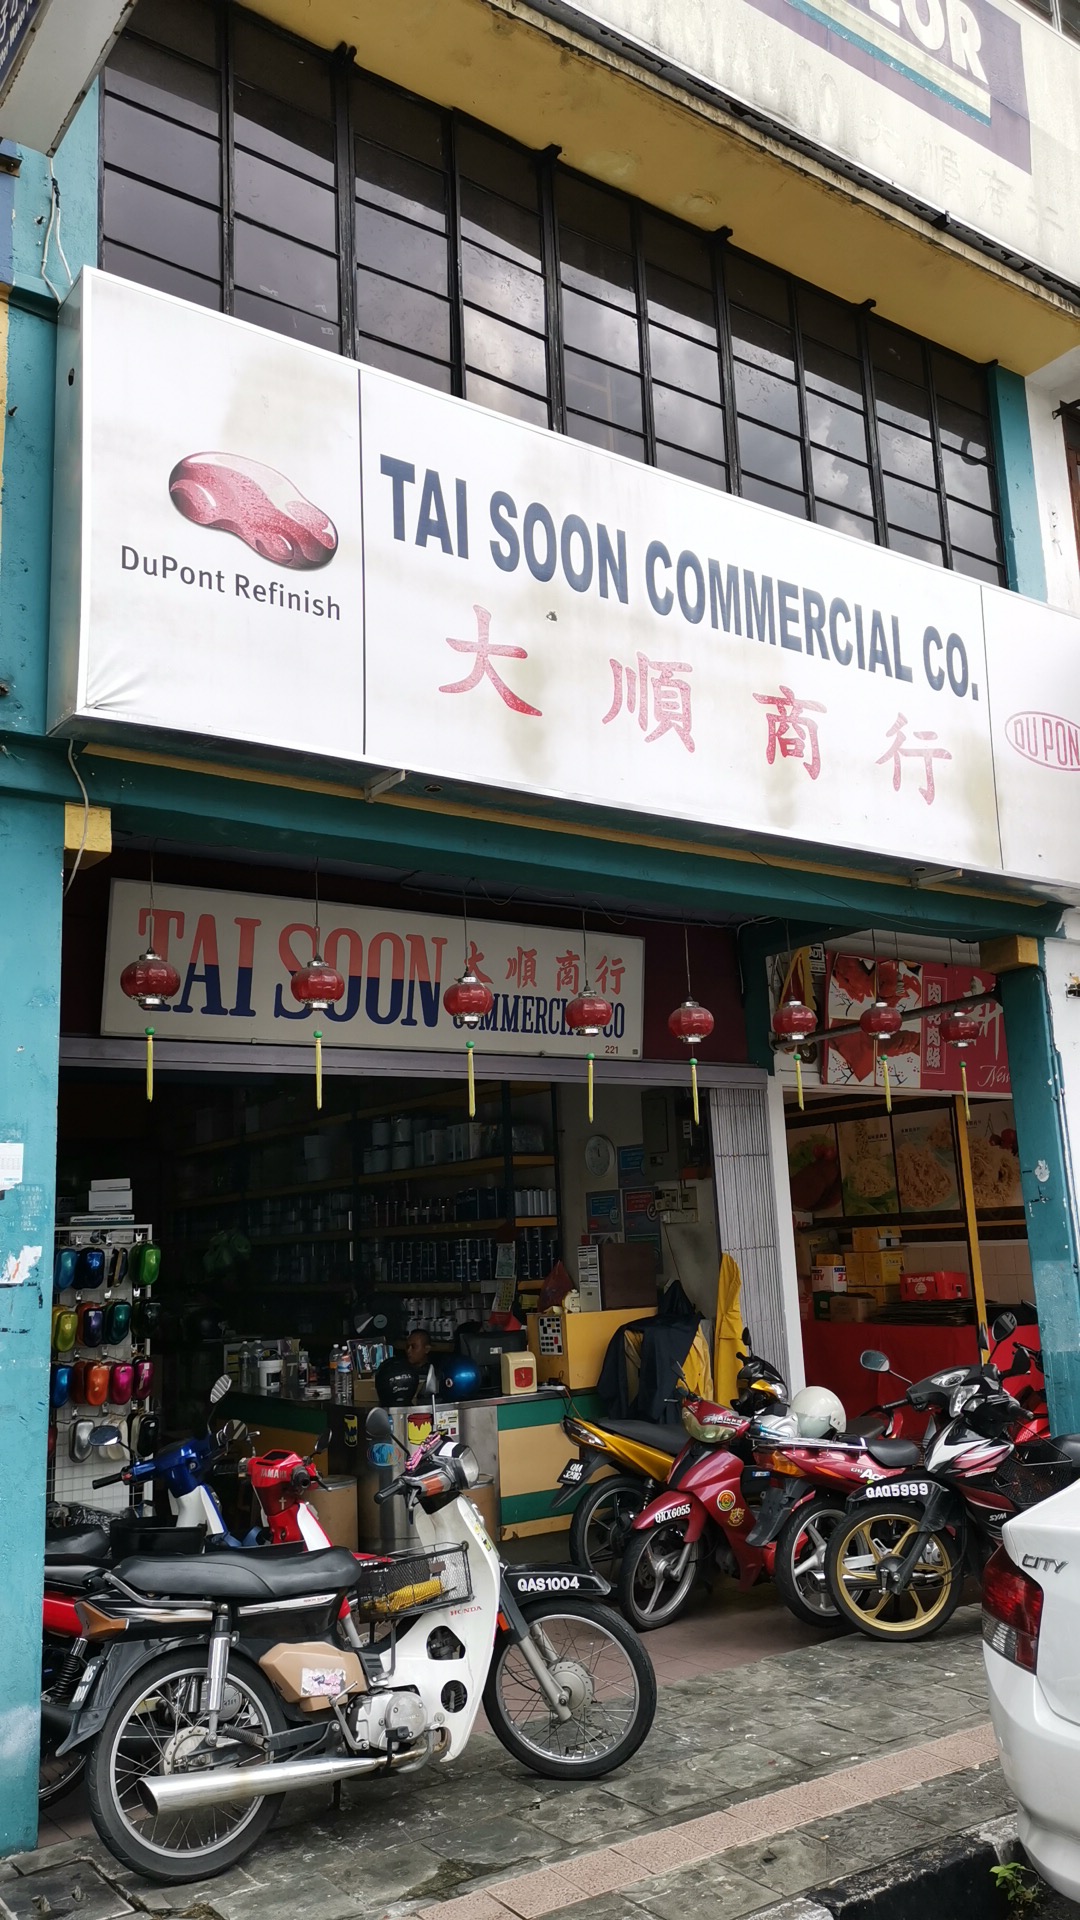 Tai Soon Commercial Co.